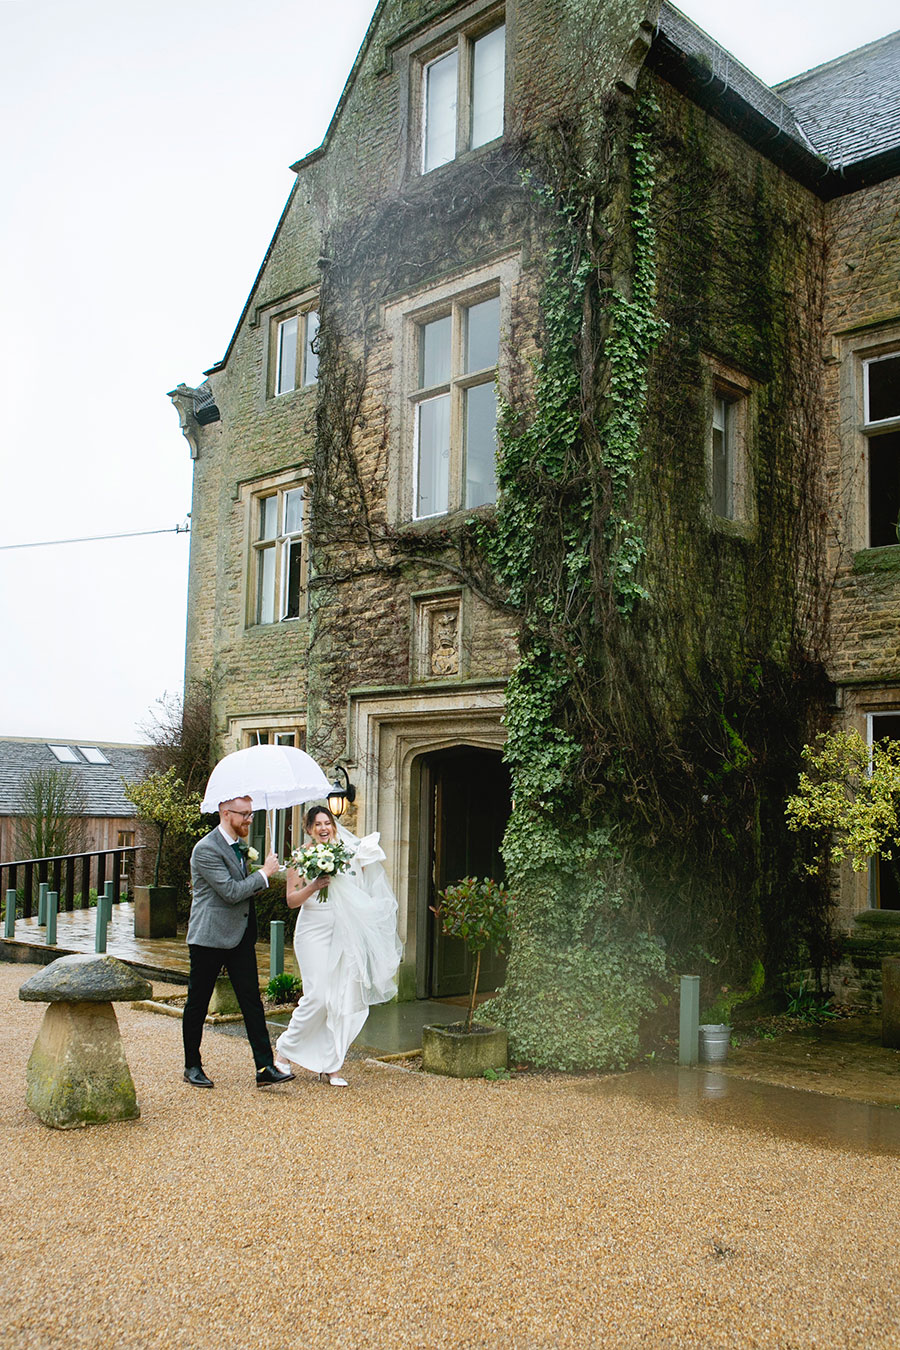 Anna & Kevin's chic modern wedding at Hyde House, with Katrina Matthews Photography (25)